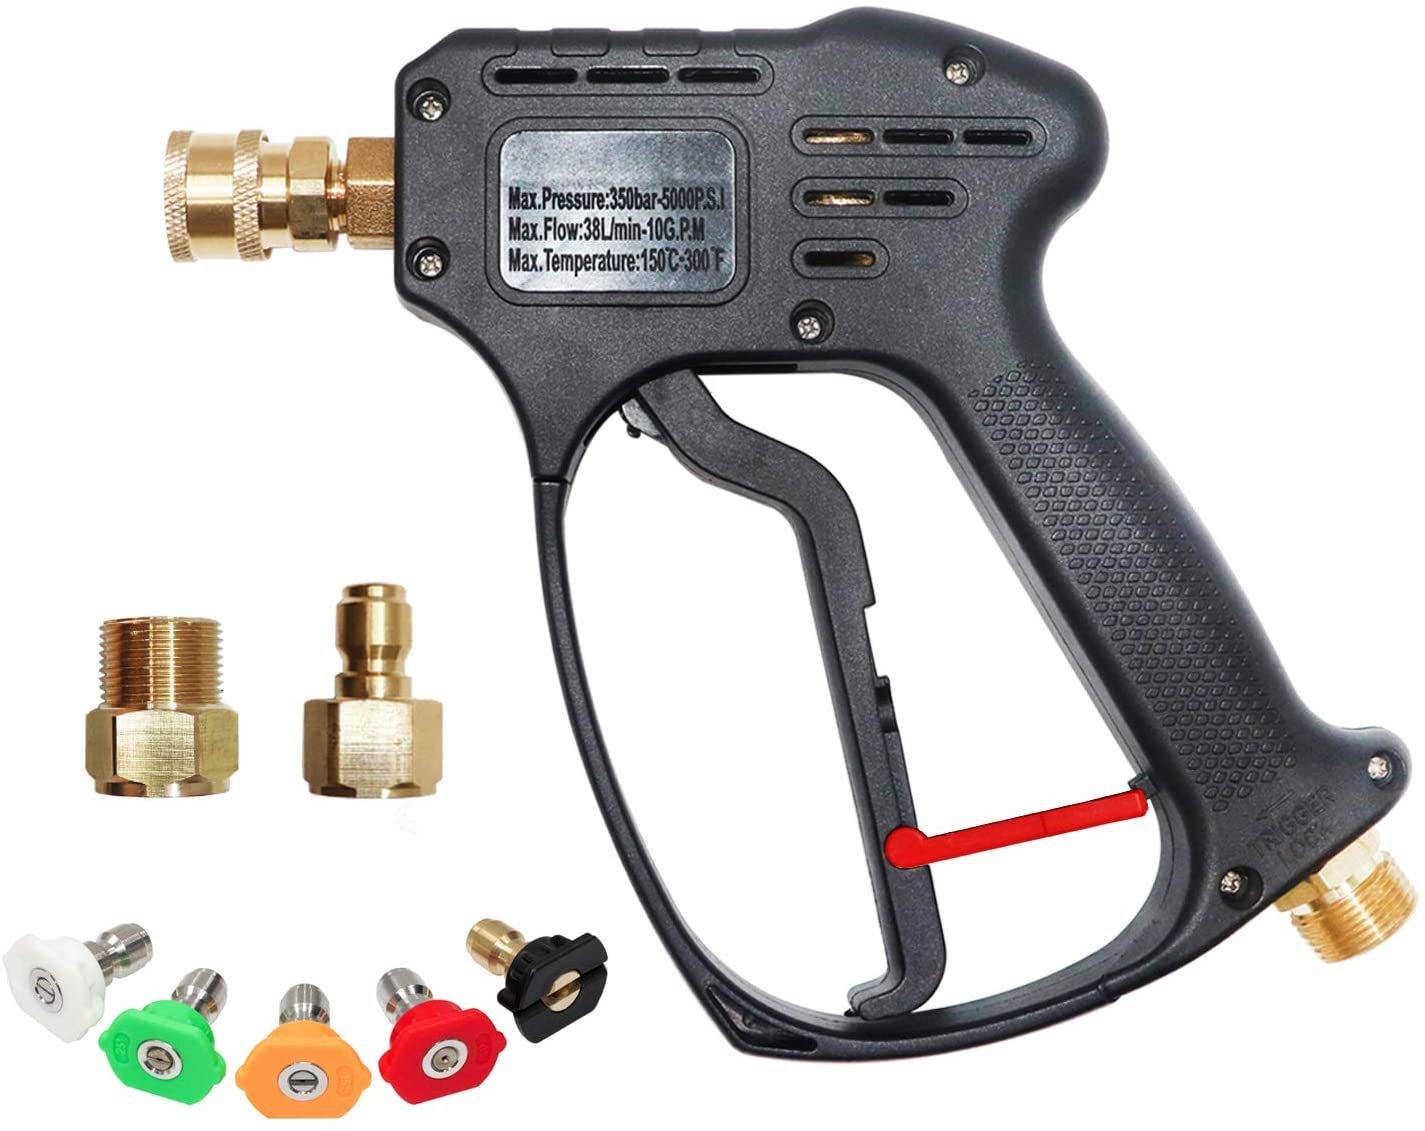  High-pressure power washer short gun kit with 5-colour nozzles  4000psi